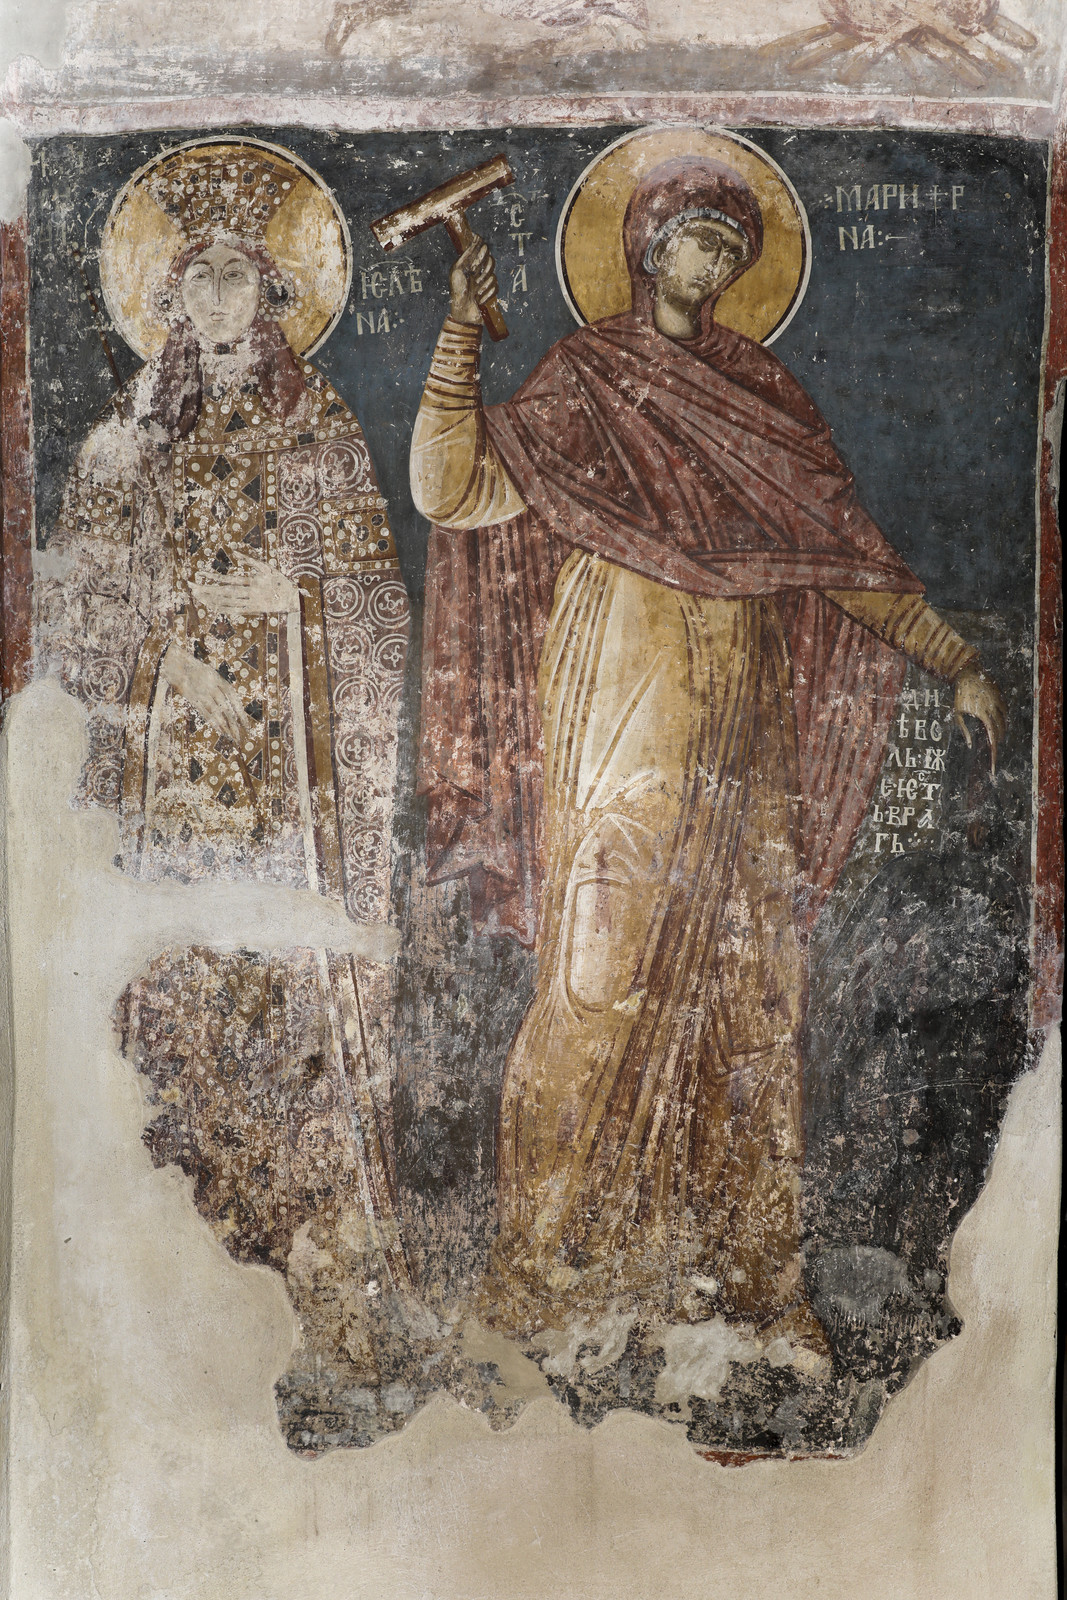 Queen Jelena of Serbia and St. Marina (St. Margaret of Antioch)